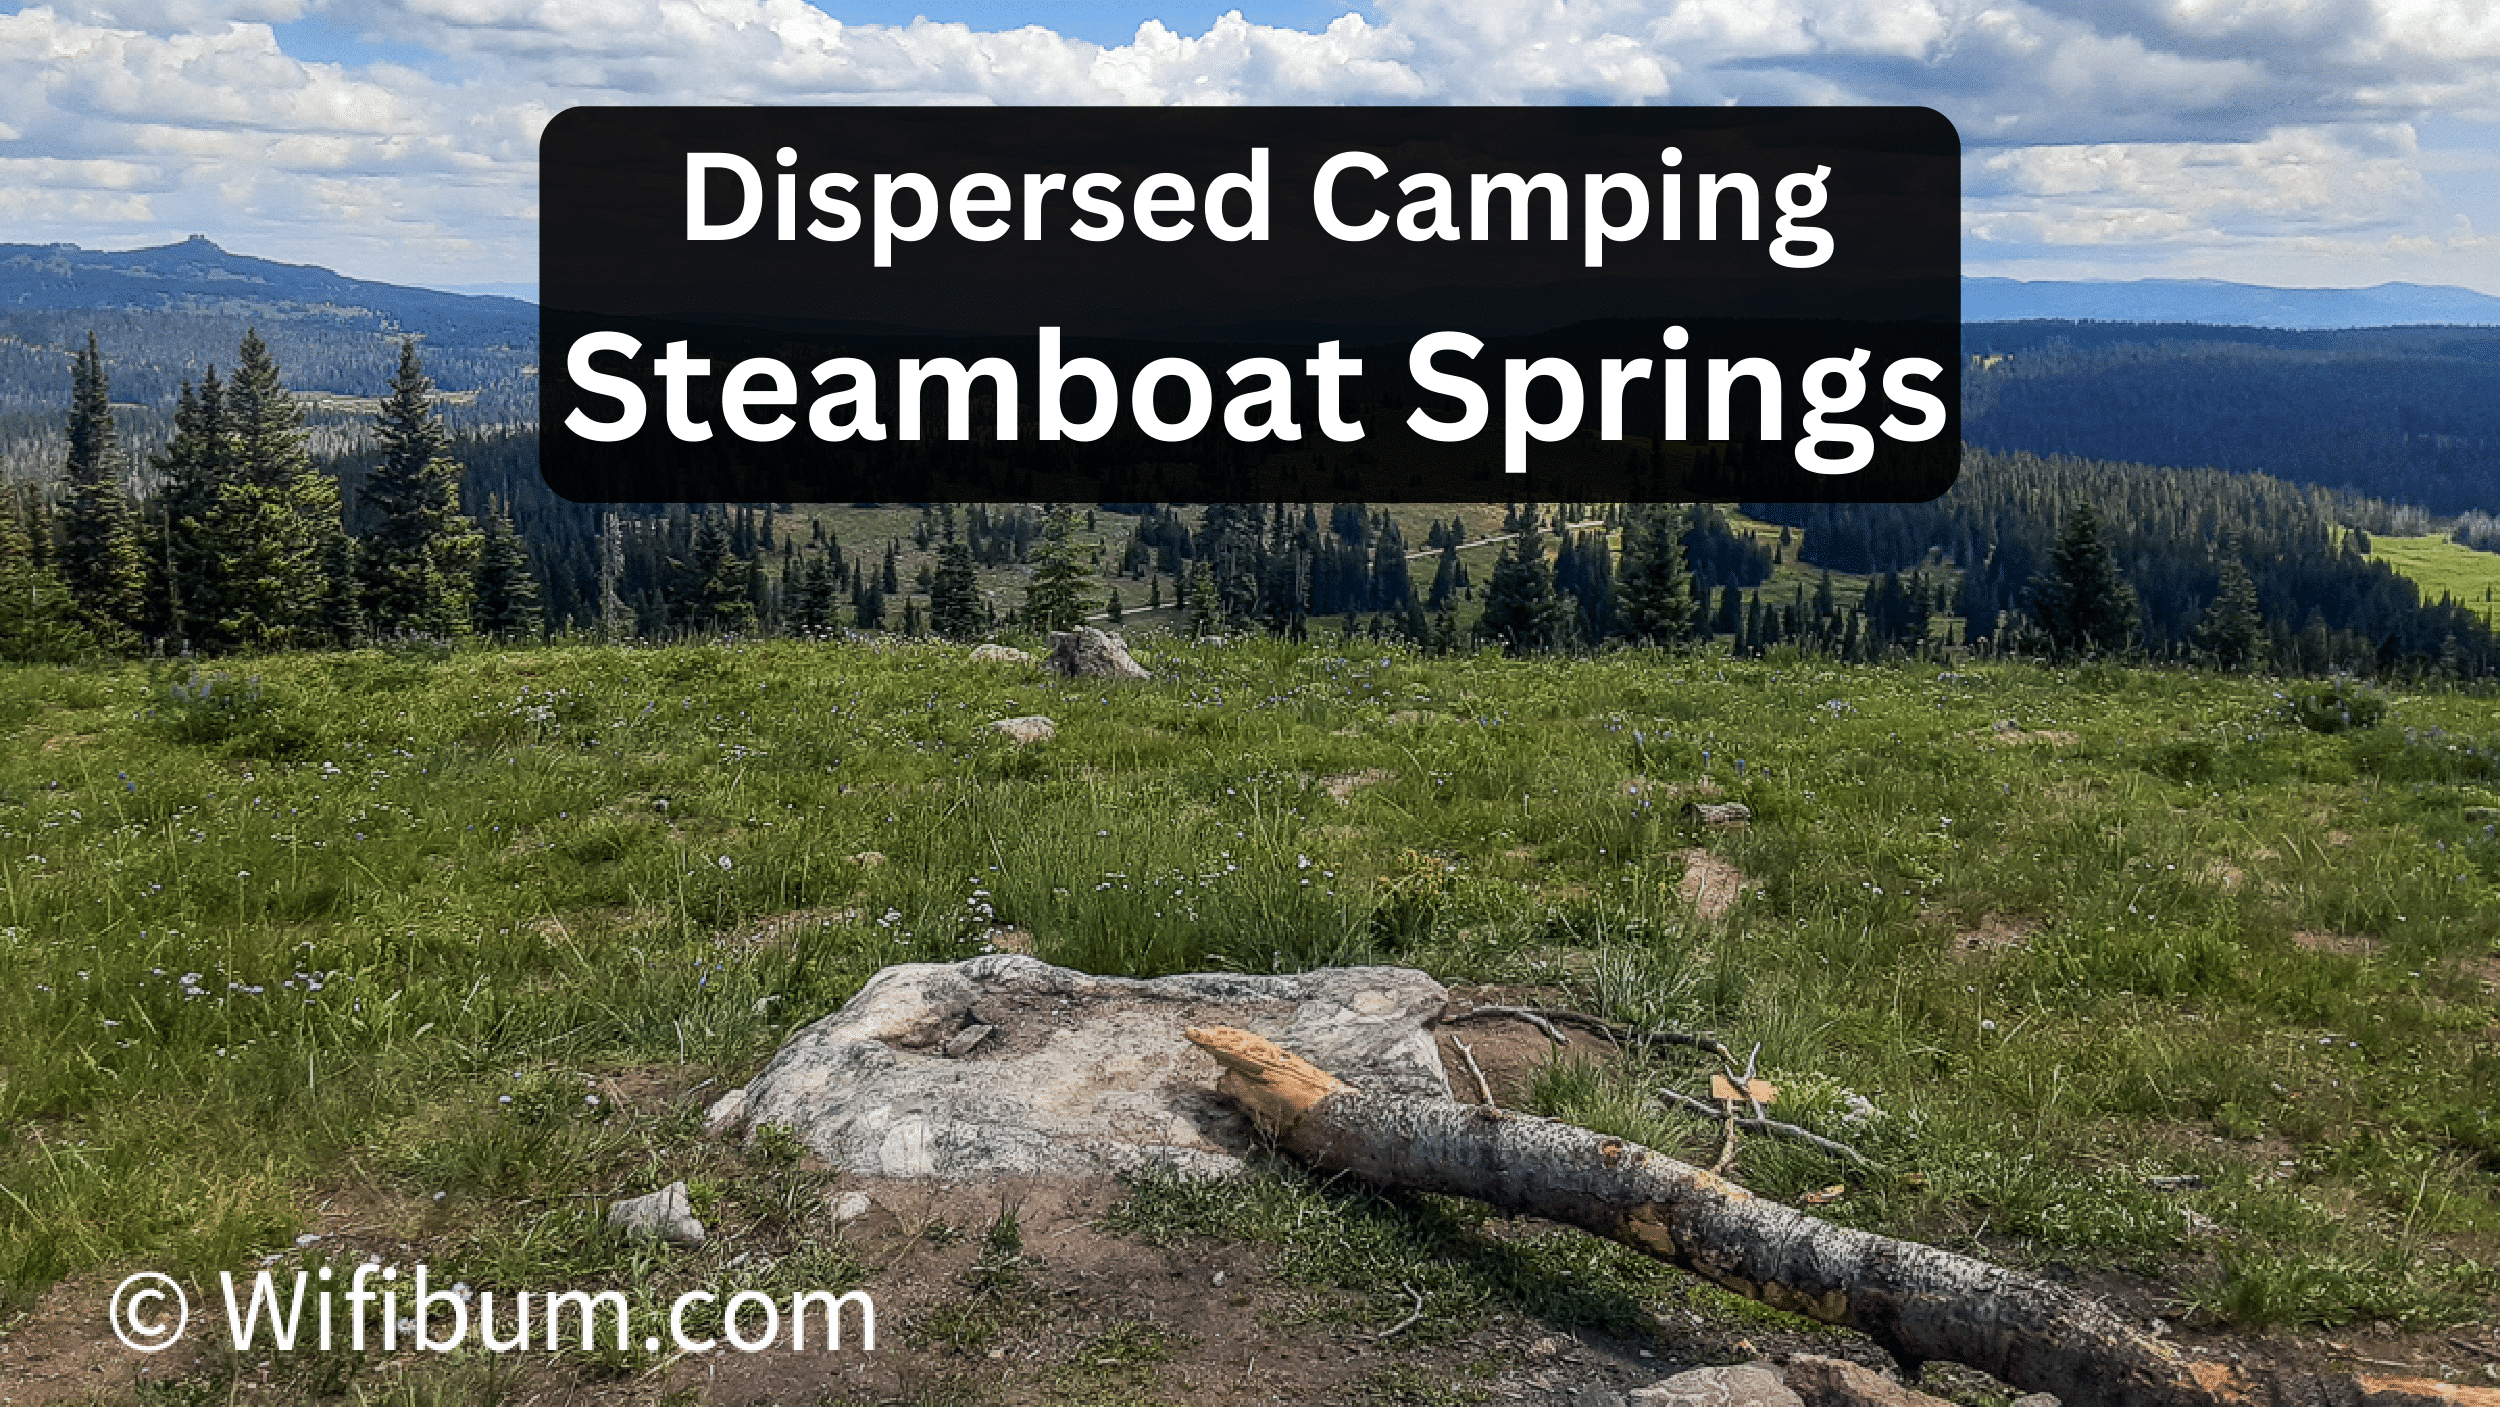 Best Dispersed Camping near Steamboat Springs: 5 Free Campsites to Enjoy